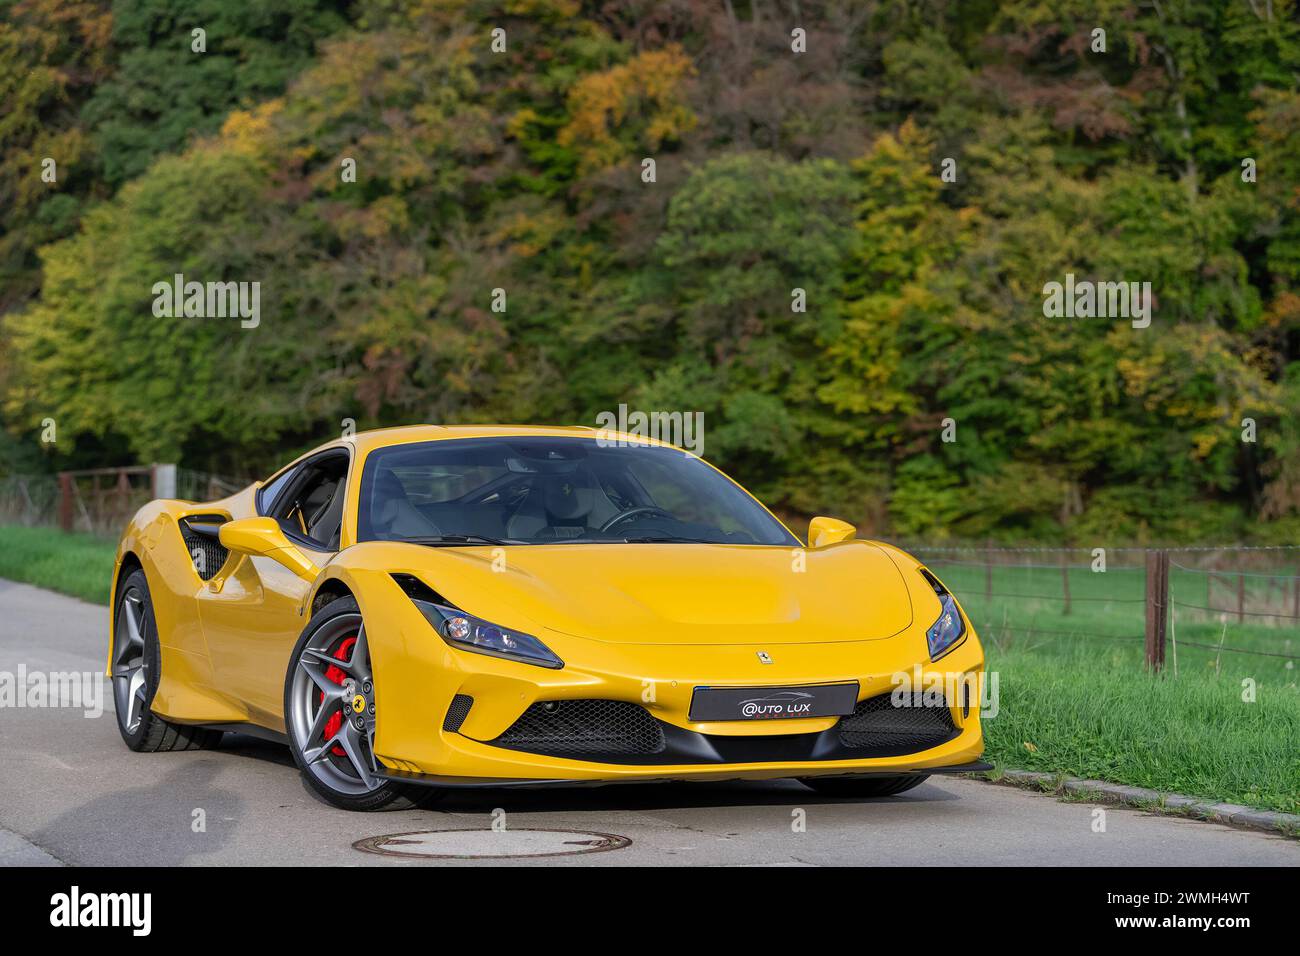 Luxembourg City, Luxembourg - Focus on a Giallo Triplo Strato Ferrari F8 Tributo parked in a street in the countryside. Stock Photo